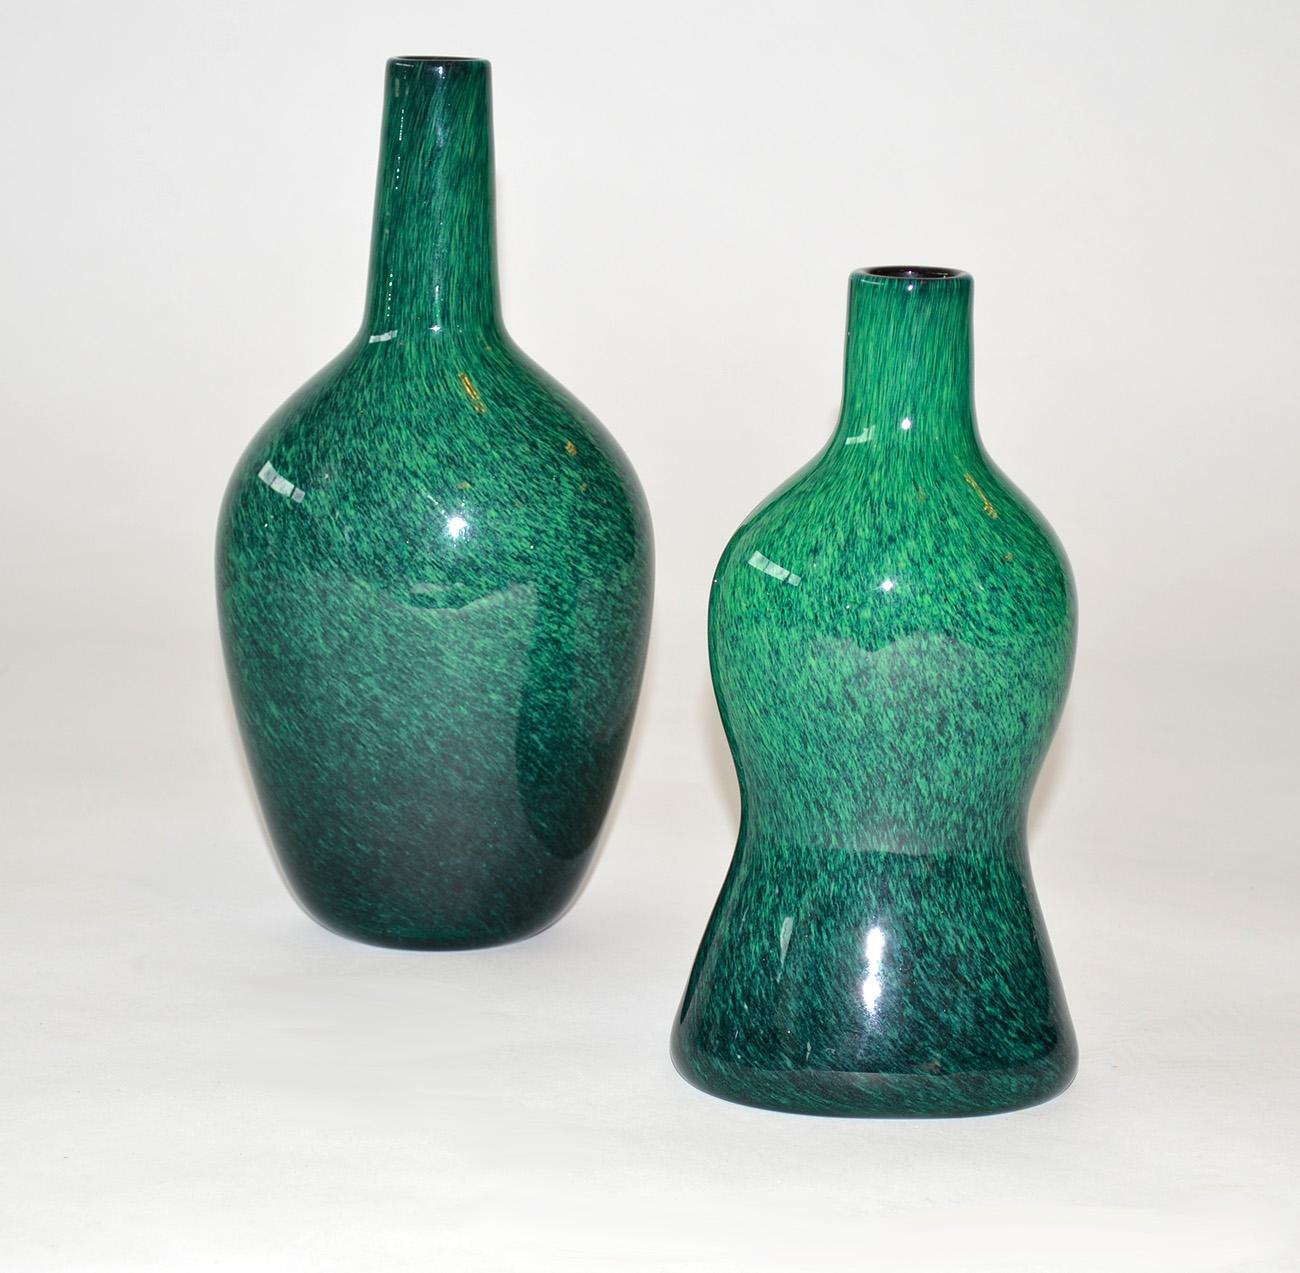 A pair of glass Vases by Toni Zuccheri for Barovier & Toso Murano Italy 1980s
Green and black blown glass bud vases, vessels or bottles both signed. Price is for the pair. Measures: Larger 10.5